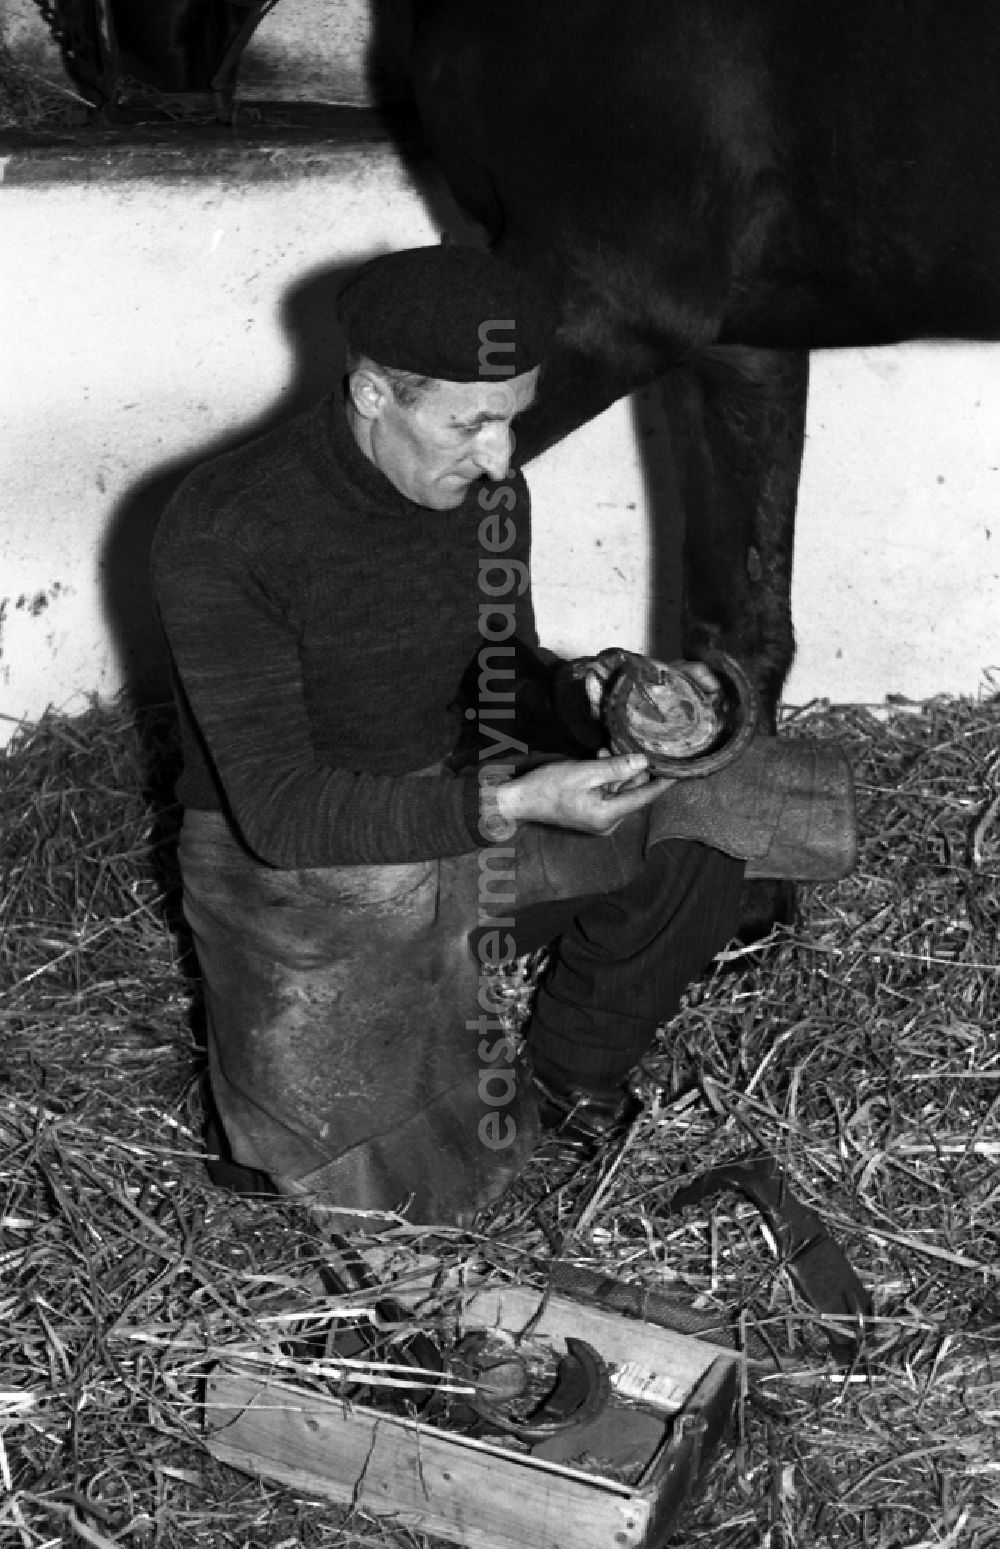 GDR picture archive: Dresden - Farrier - Farrier shoeing horses' hooves in Dresden in the state Saxony on the territory of the former GDR, German Democratic Republic